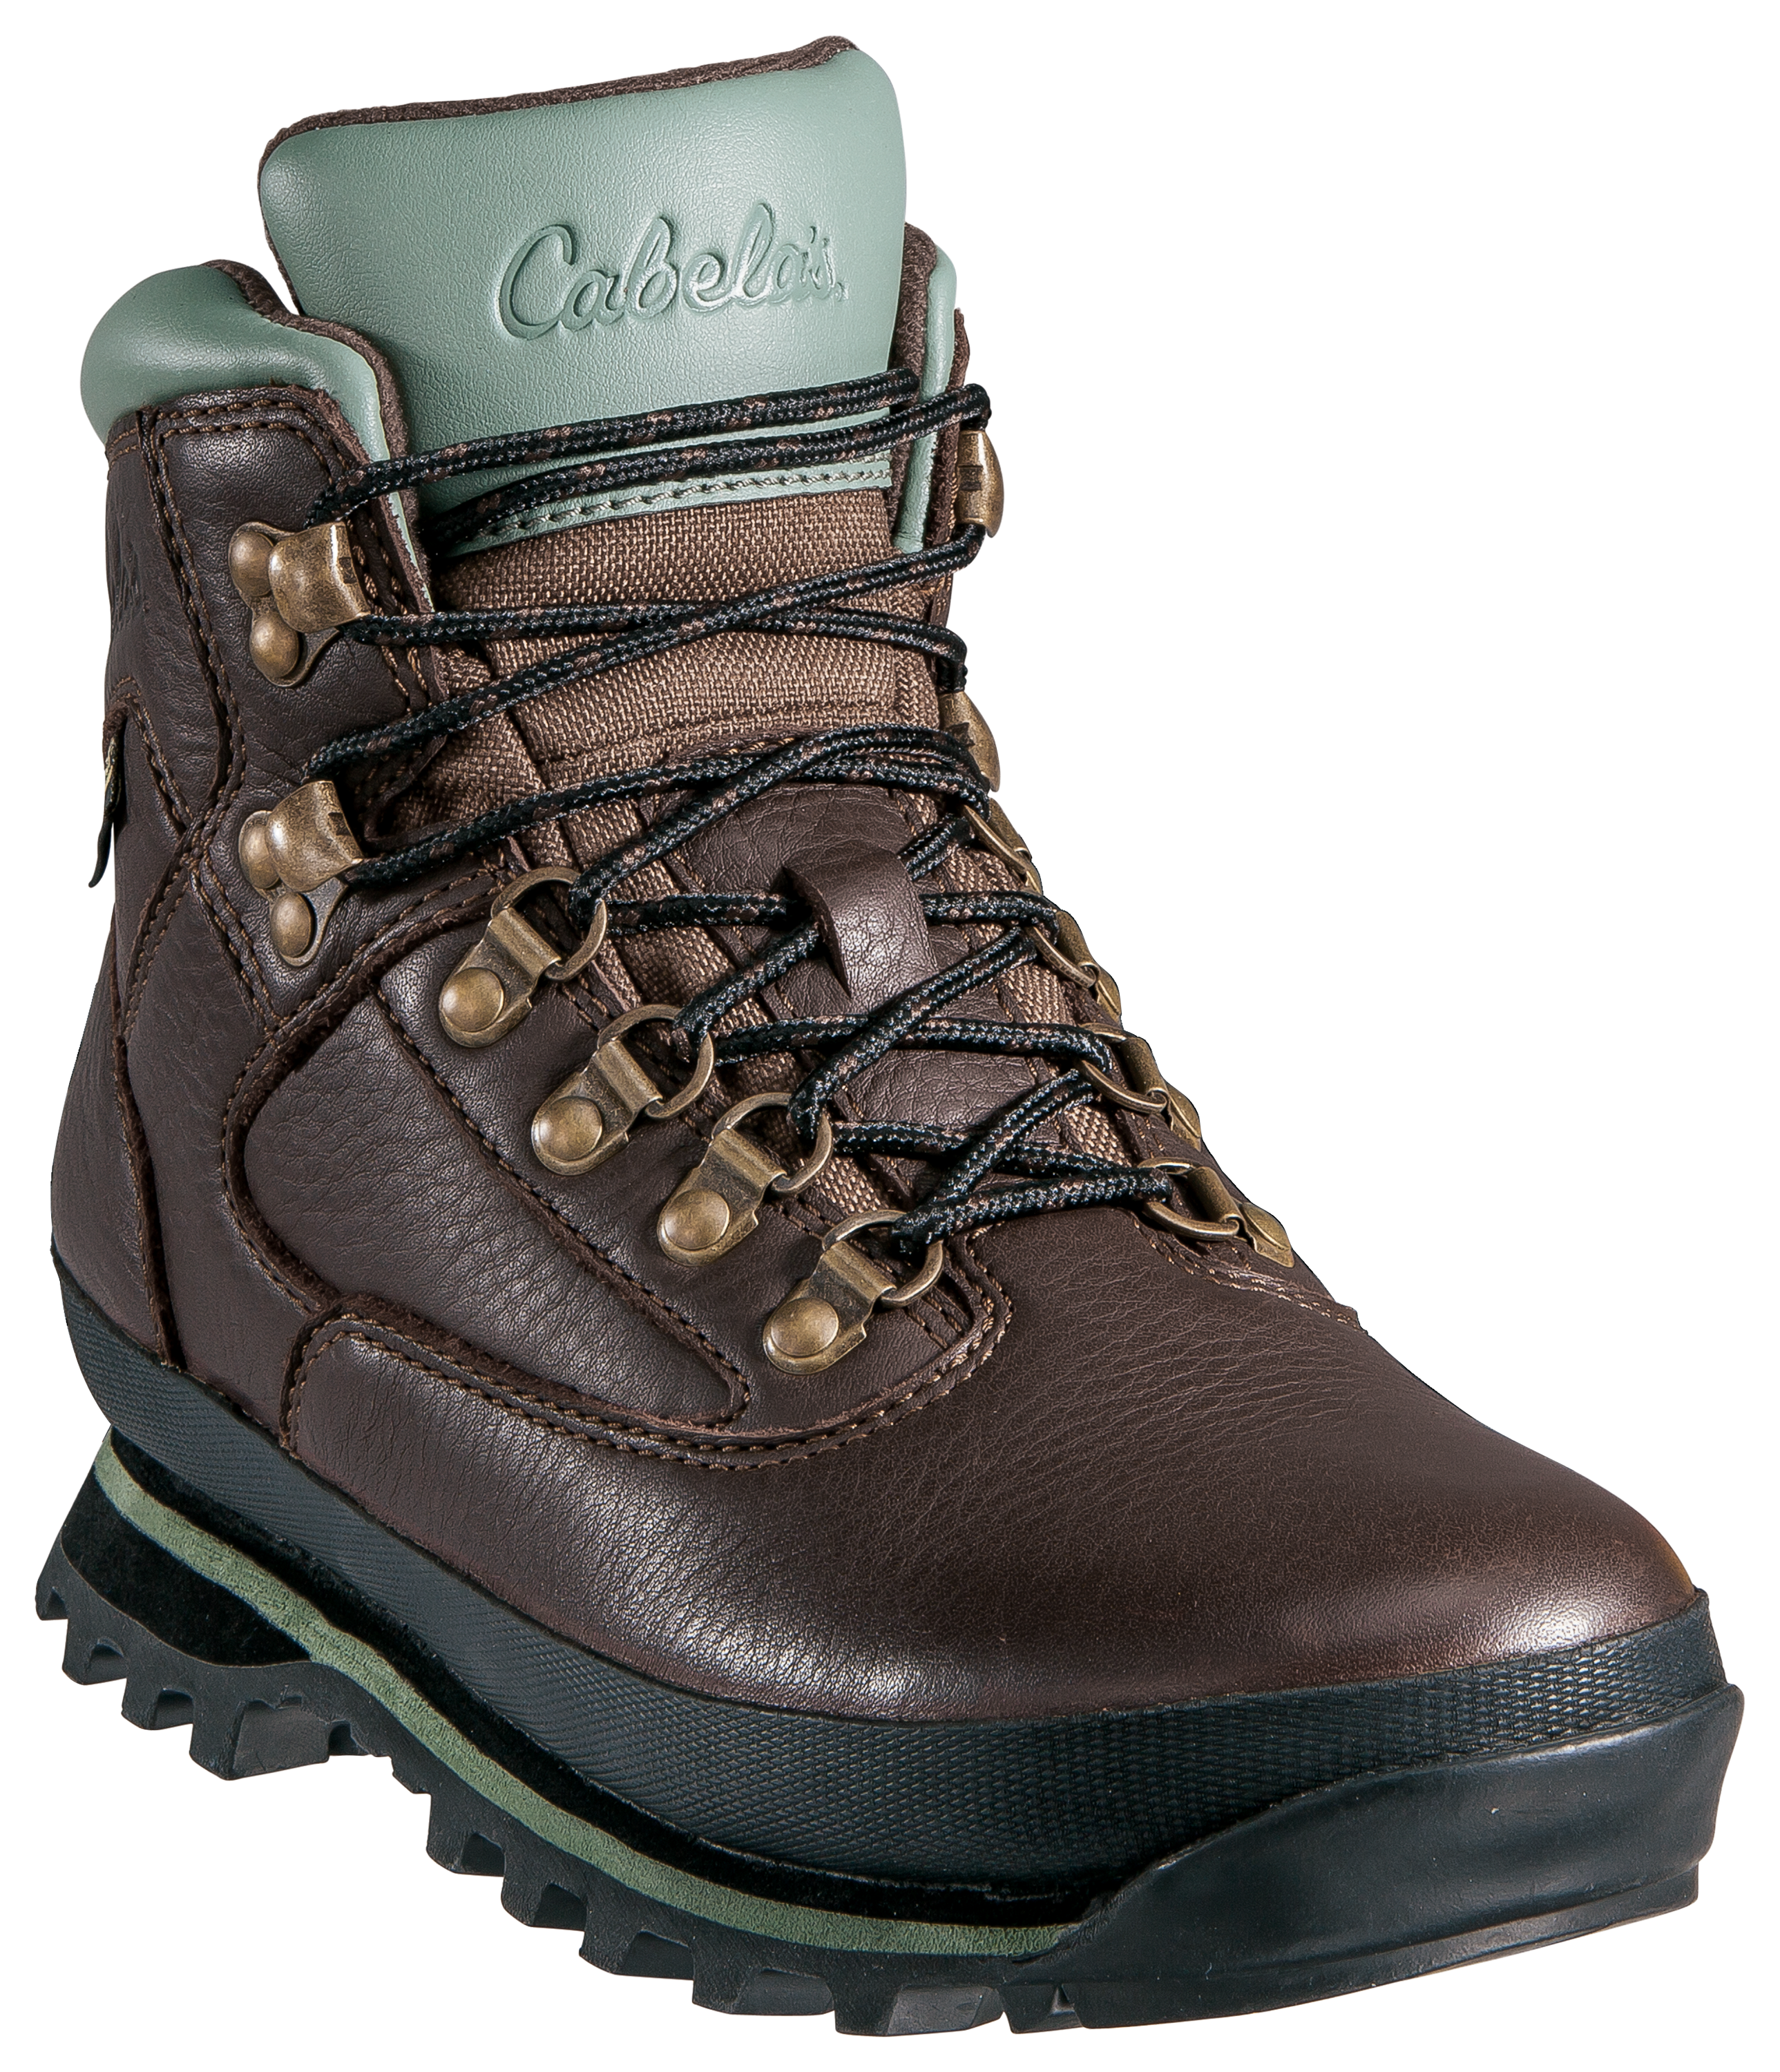 Cabela's Rimrock Mid GORE-TEX Hiking Boots for Ladies